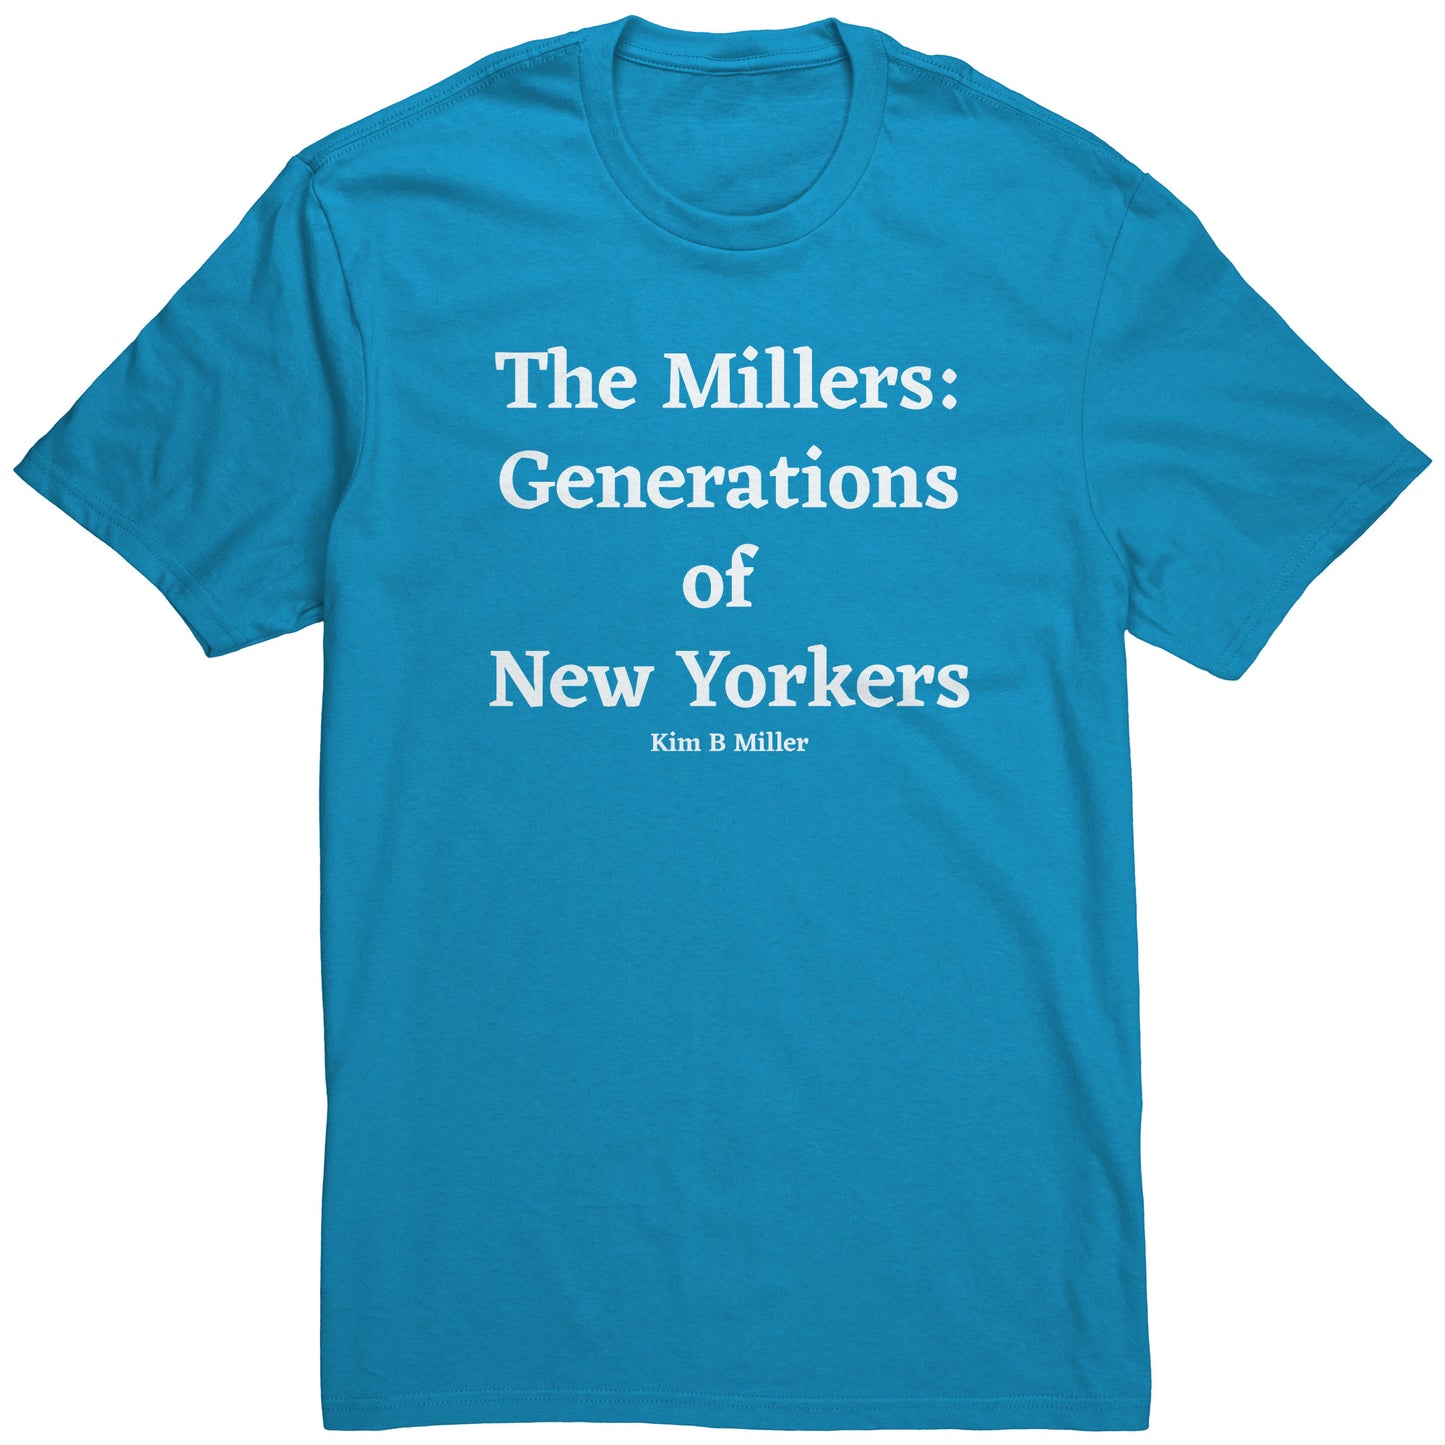 The Millers Generations (Family) District Men's Shirt